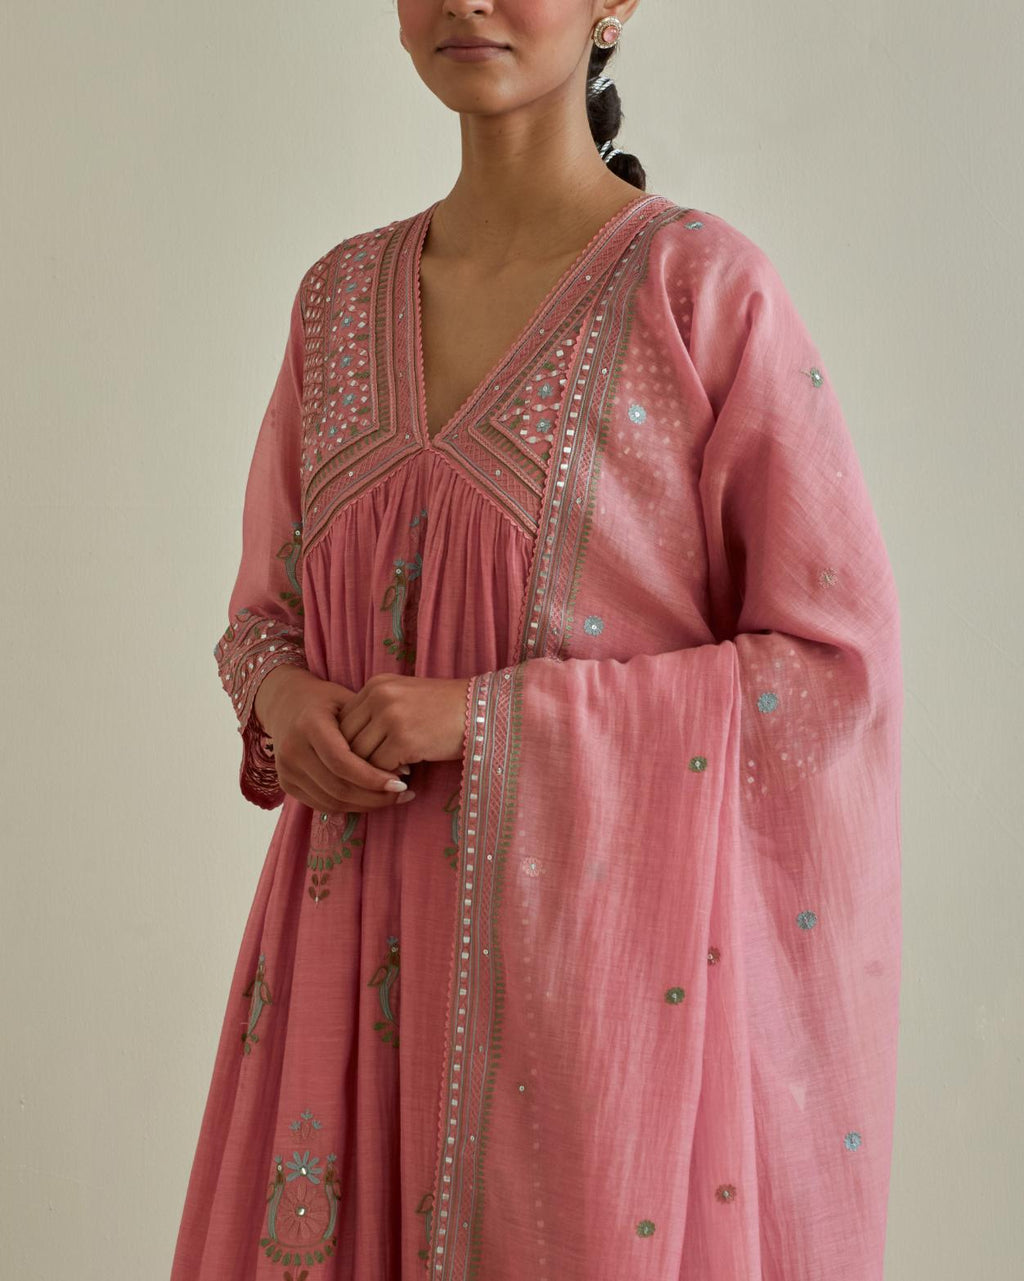 Pink cotton chanderi embroidered kurta dress set with V neck, yoke and fine gathers at empire line.